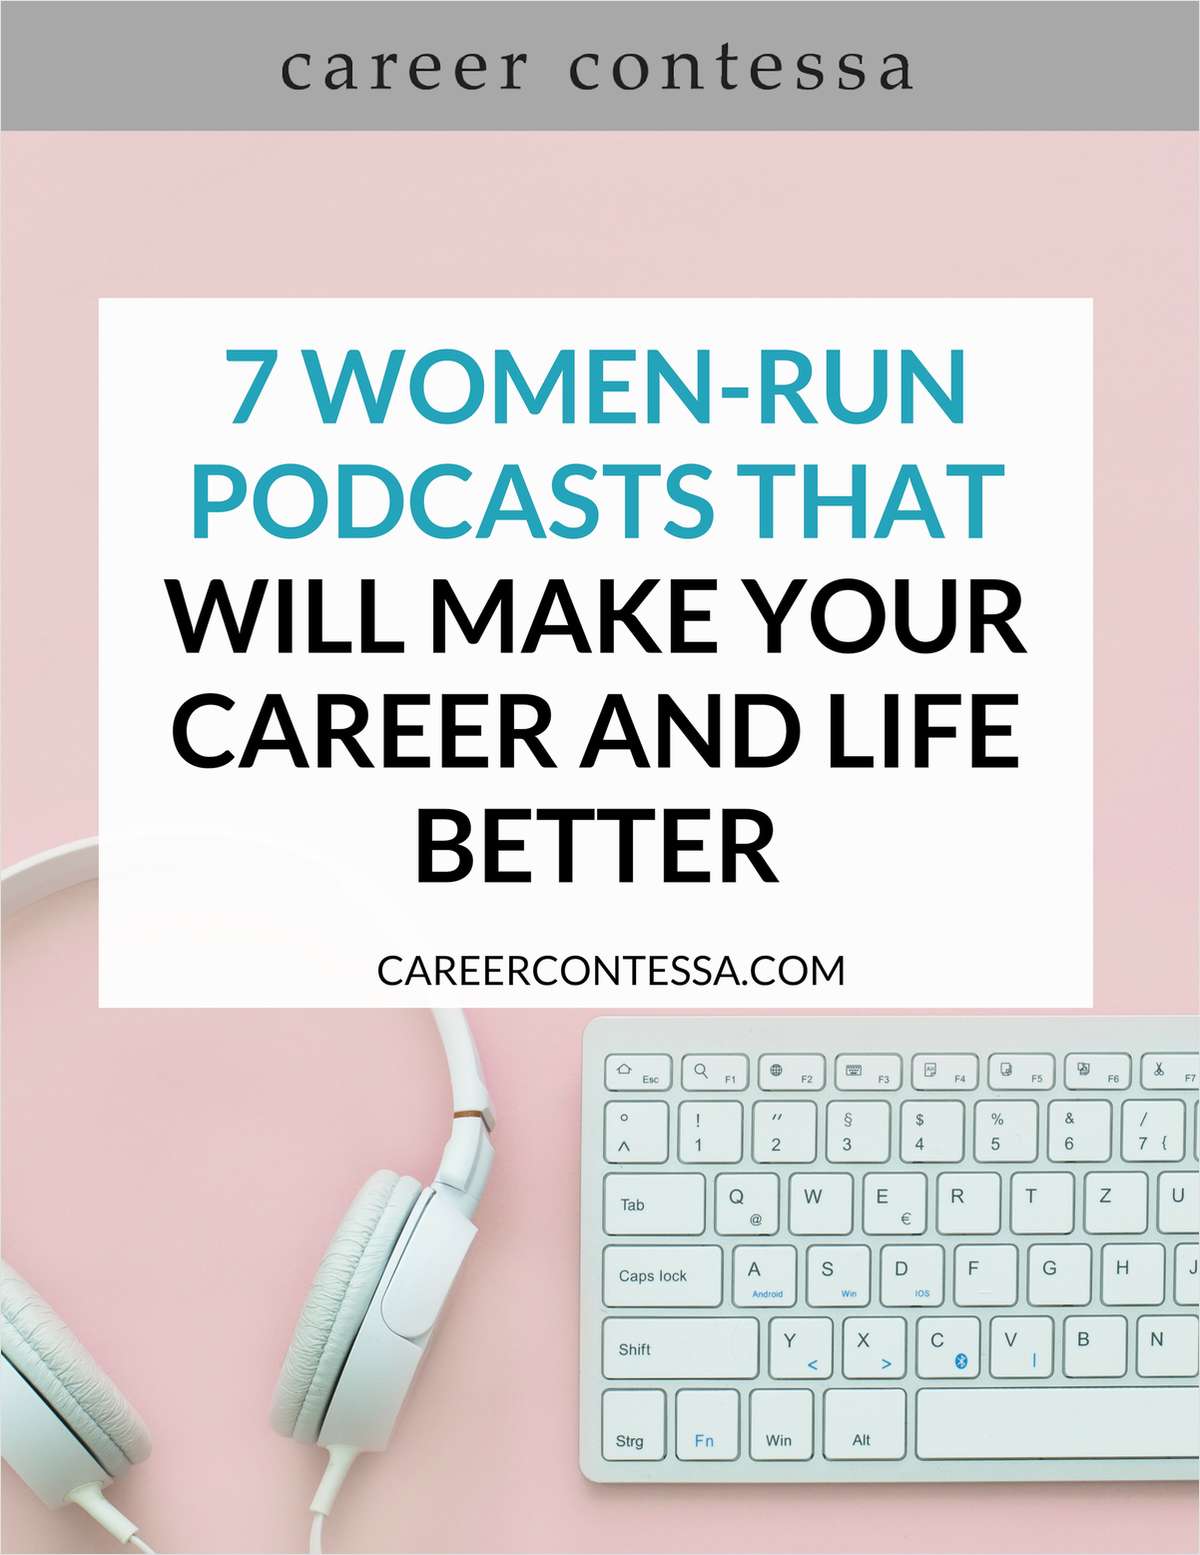 7 Women-Run Podcasts That Will Make Your Career and Life Better